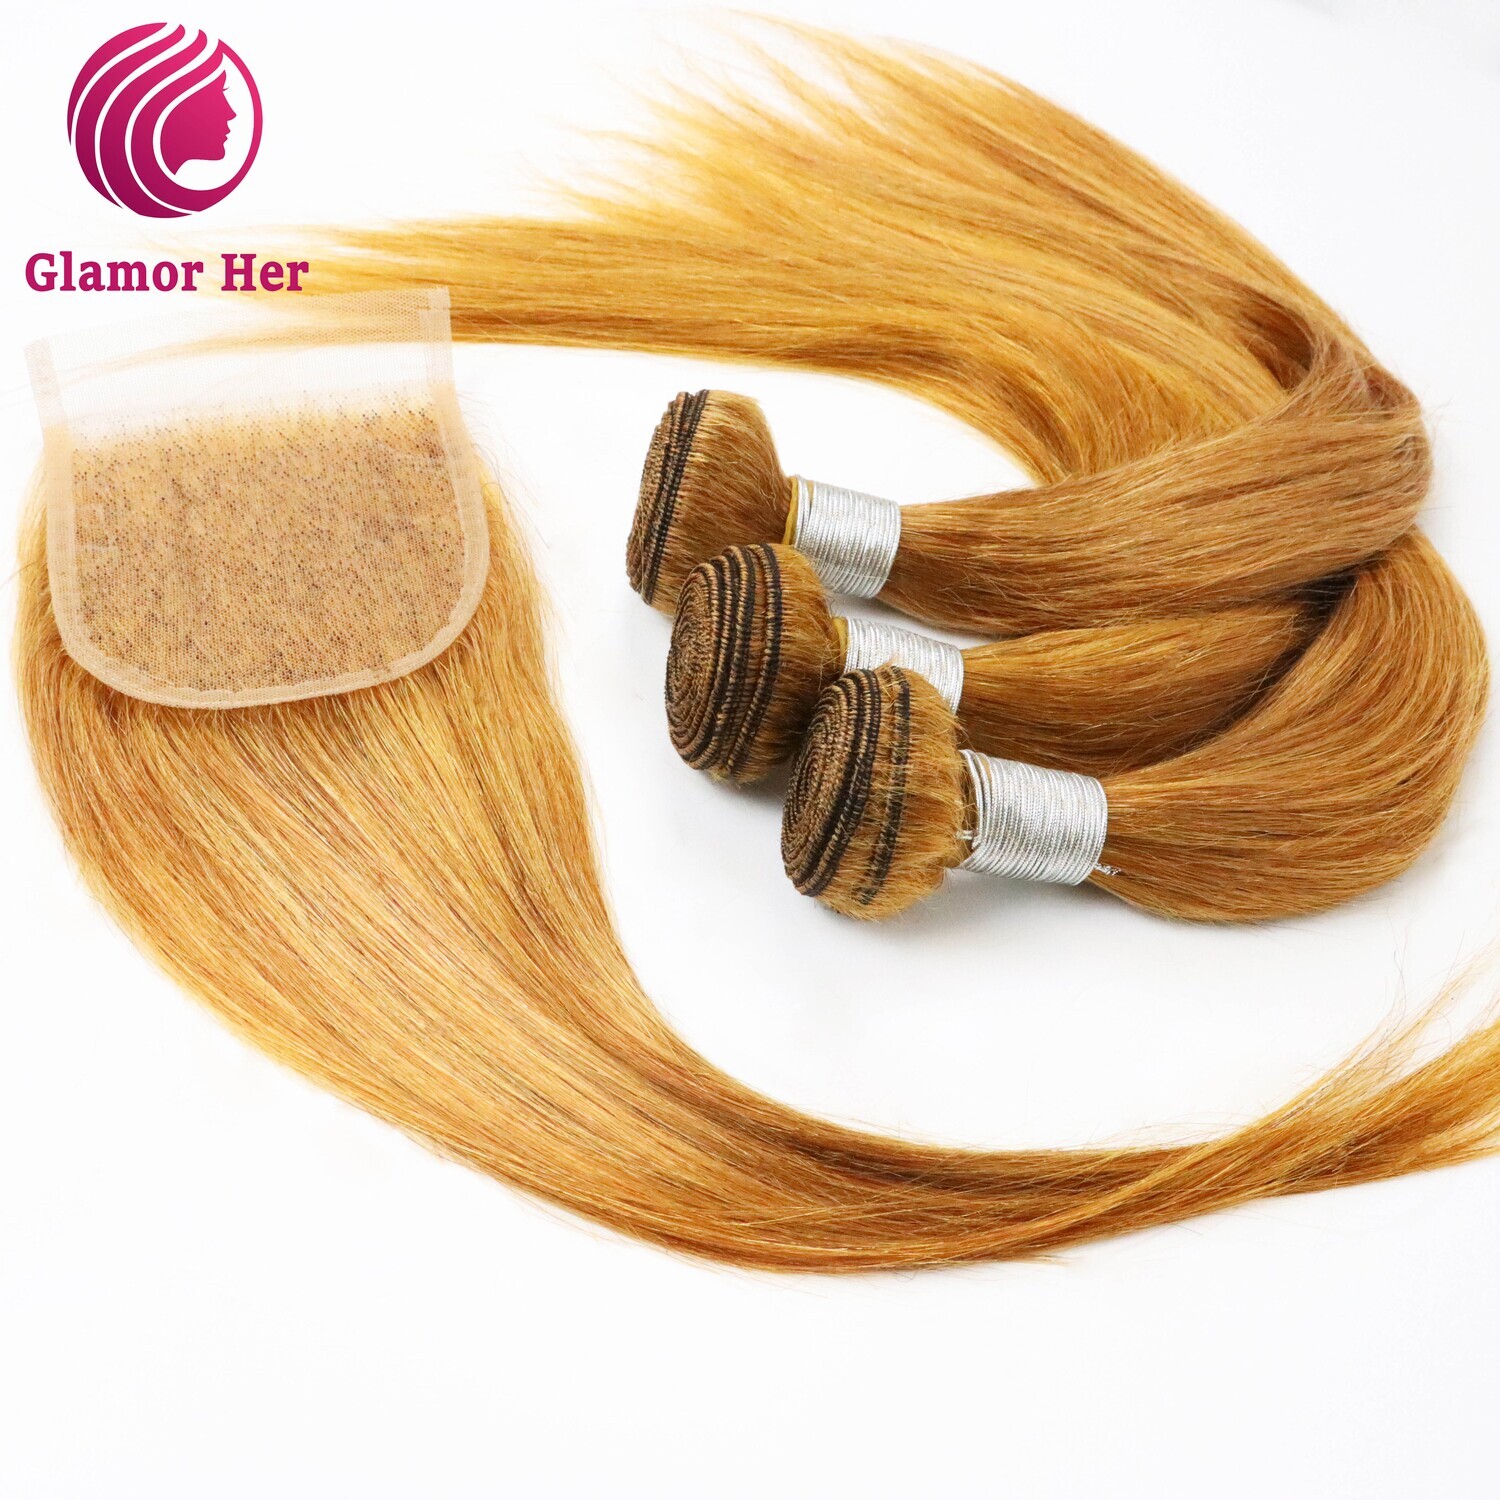 Silky straight Raw Weaving Grade 10a Virgin Hair Bundles Selling Remi Hair Extensions 10 to 16 Inch Remy Human Hair